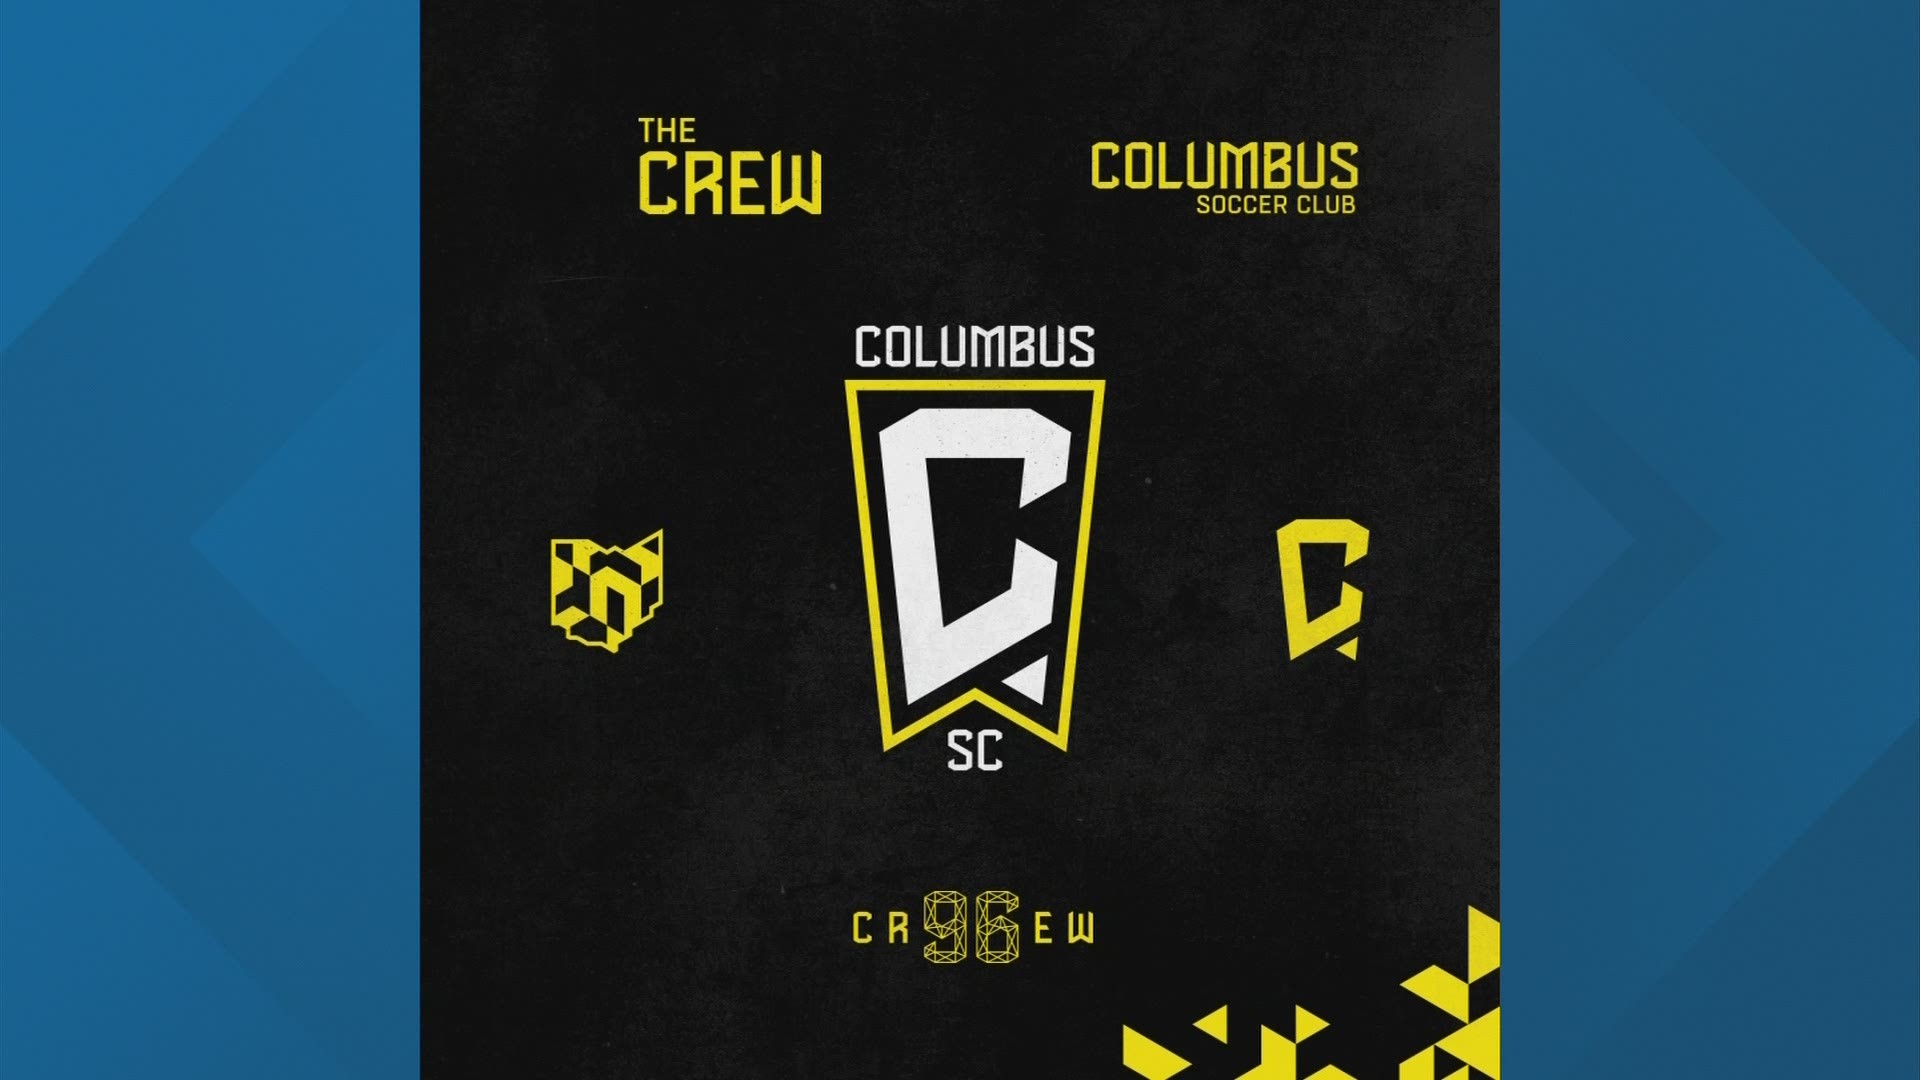 The organization said it will be known as Columbus SC while keeping The Crew as a nickname.